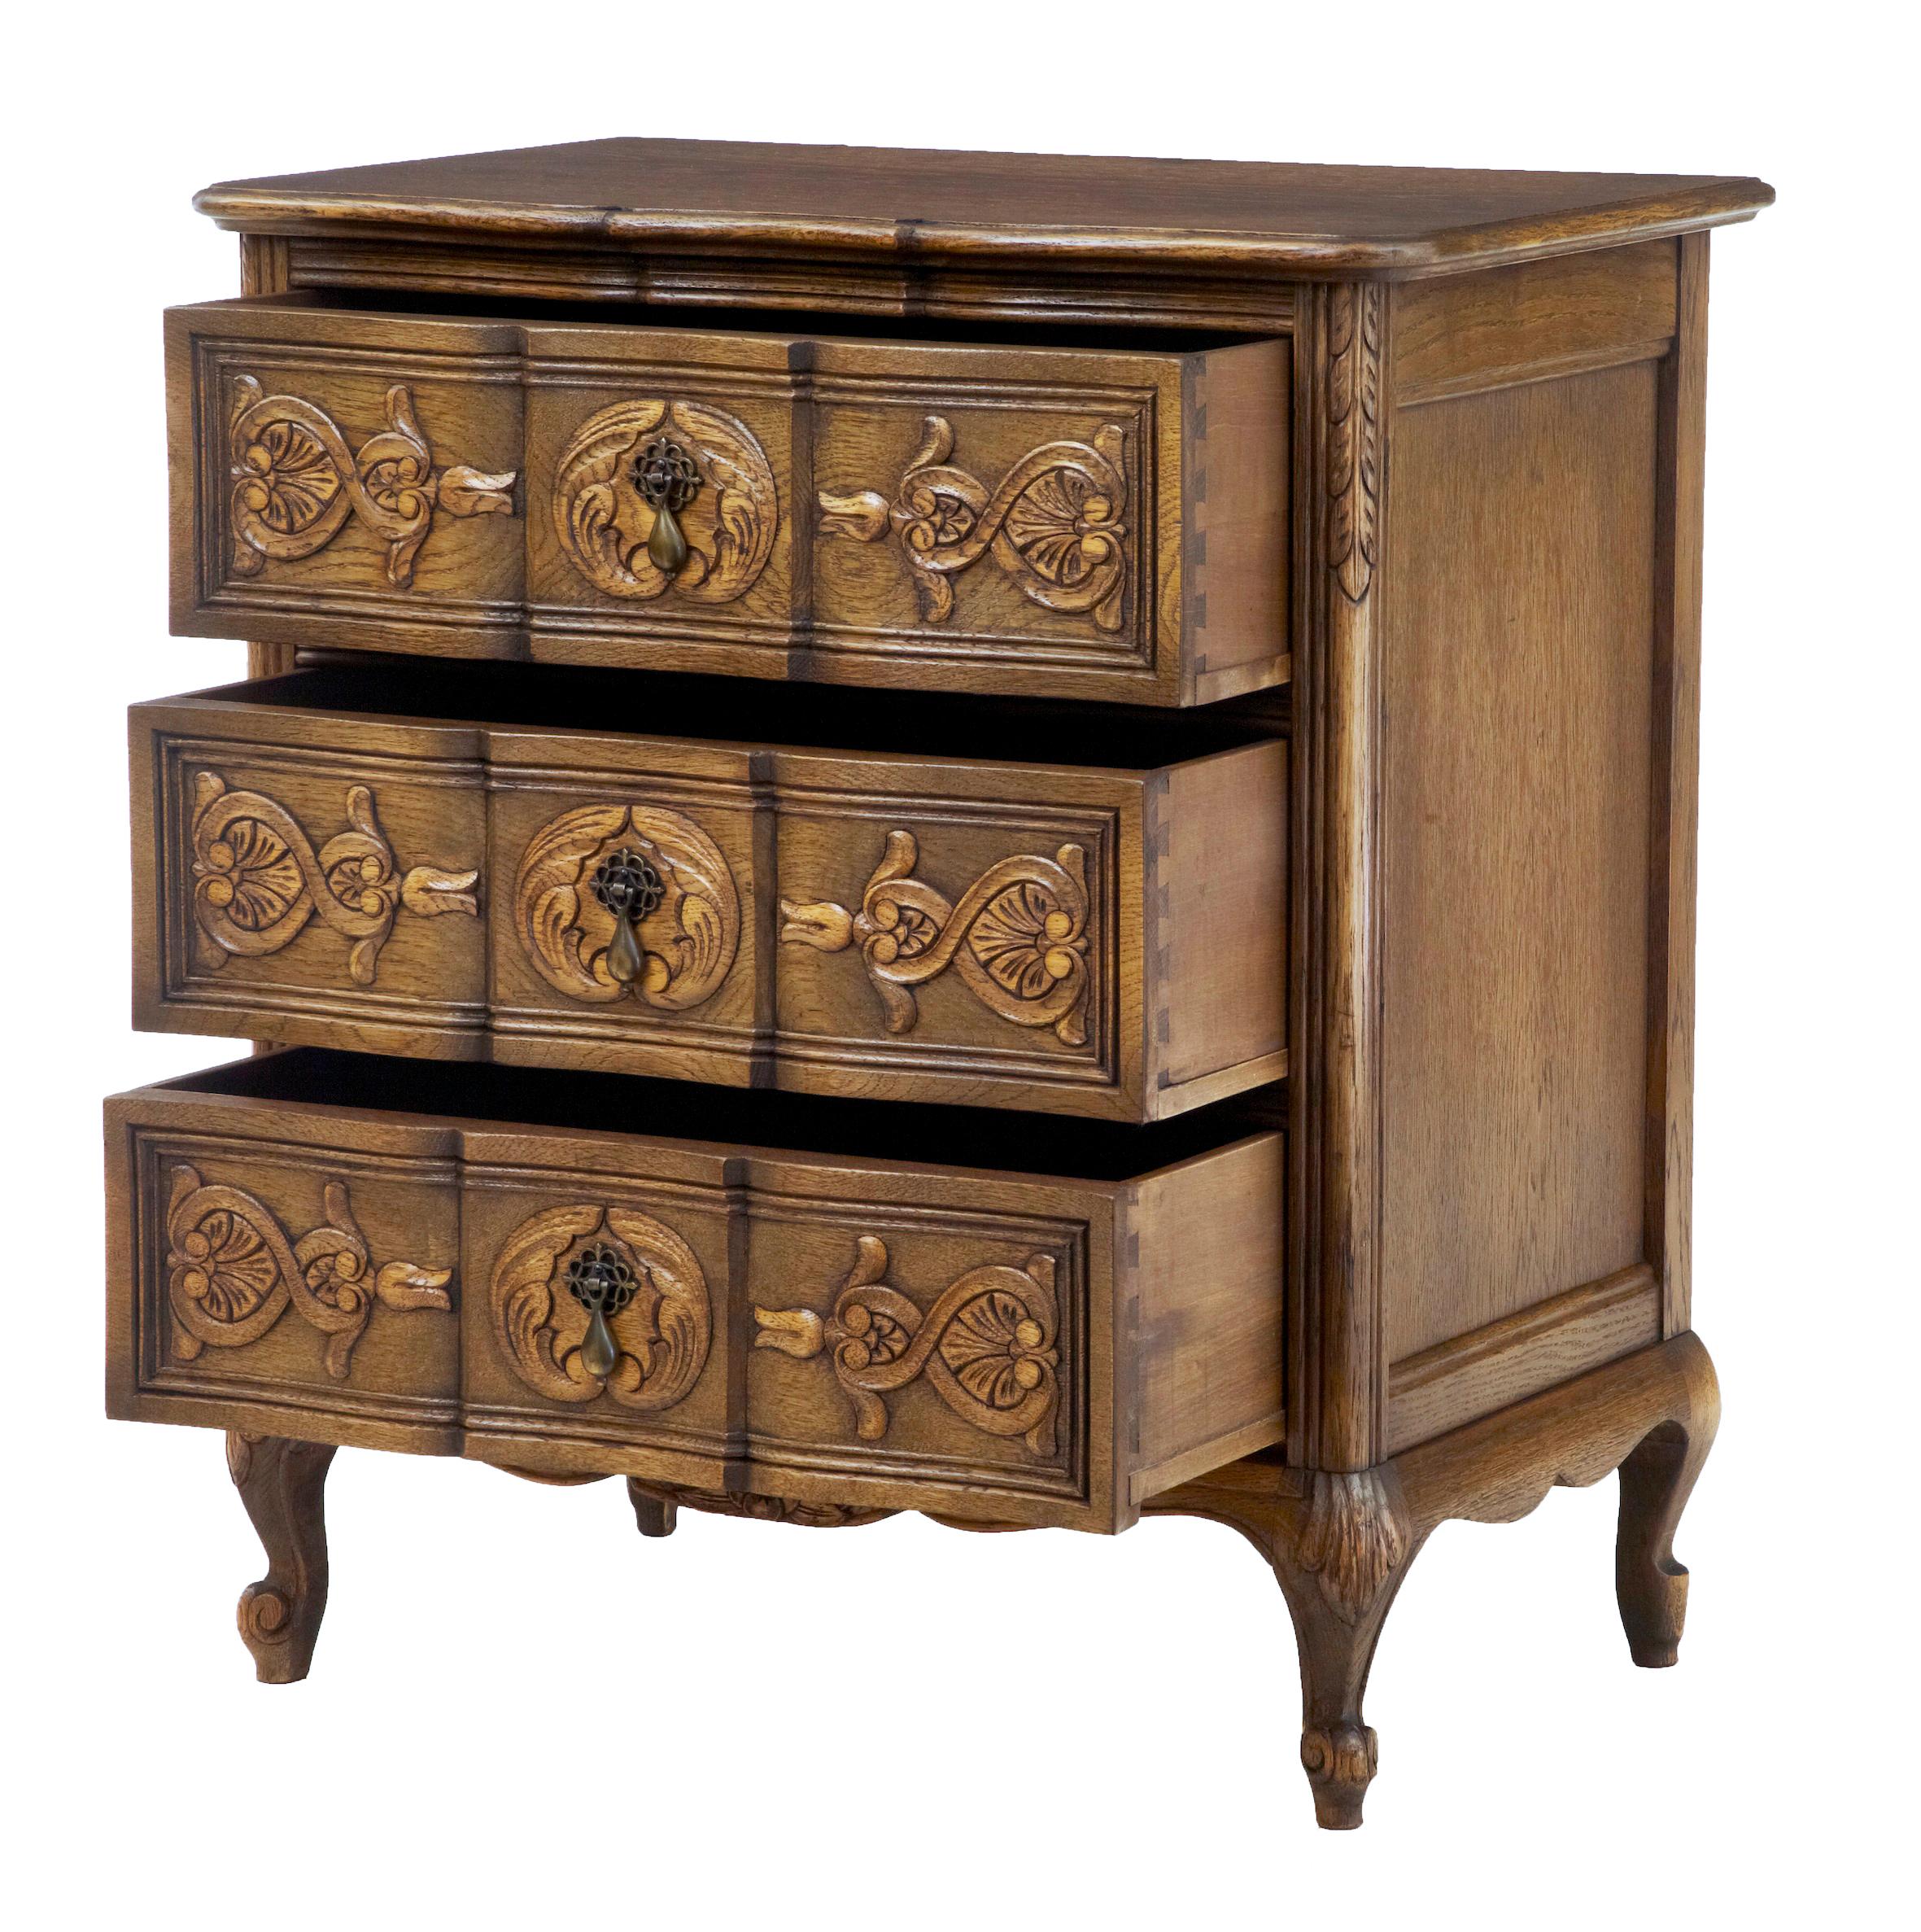 Good quality oak commode circa 1960 in the French Provincial style.

Scallop shaped front with heavily carved drawer fronts. Each fitted with a brass drop handle. Acanthus leaf detail to sides.

Standing on cabriole legs.

Some surface